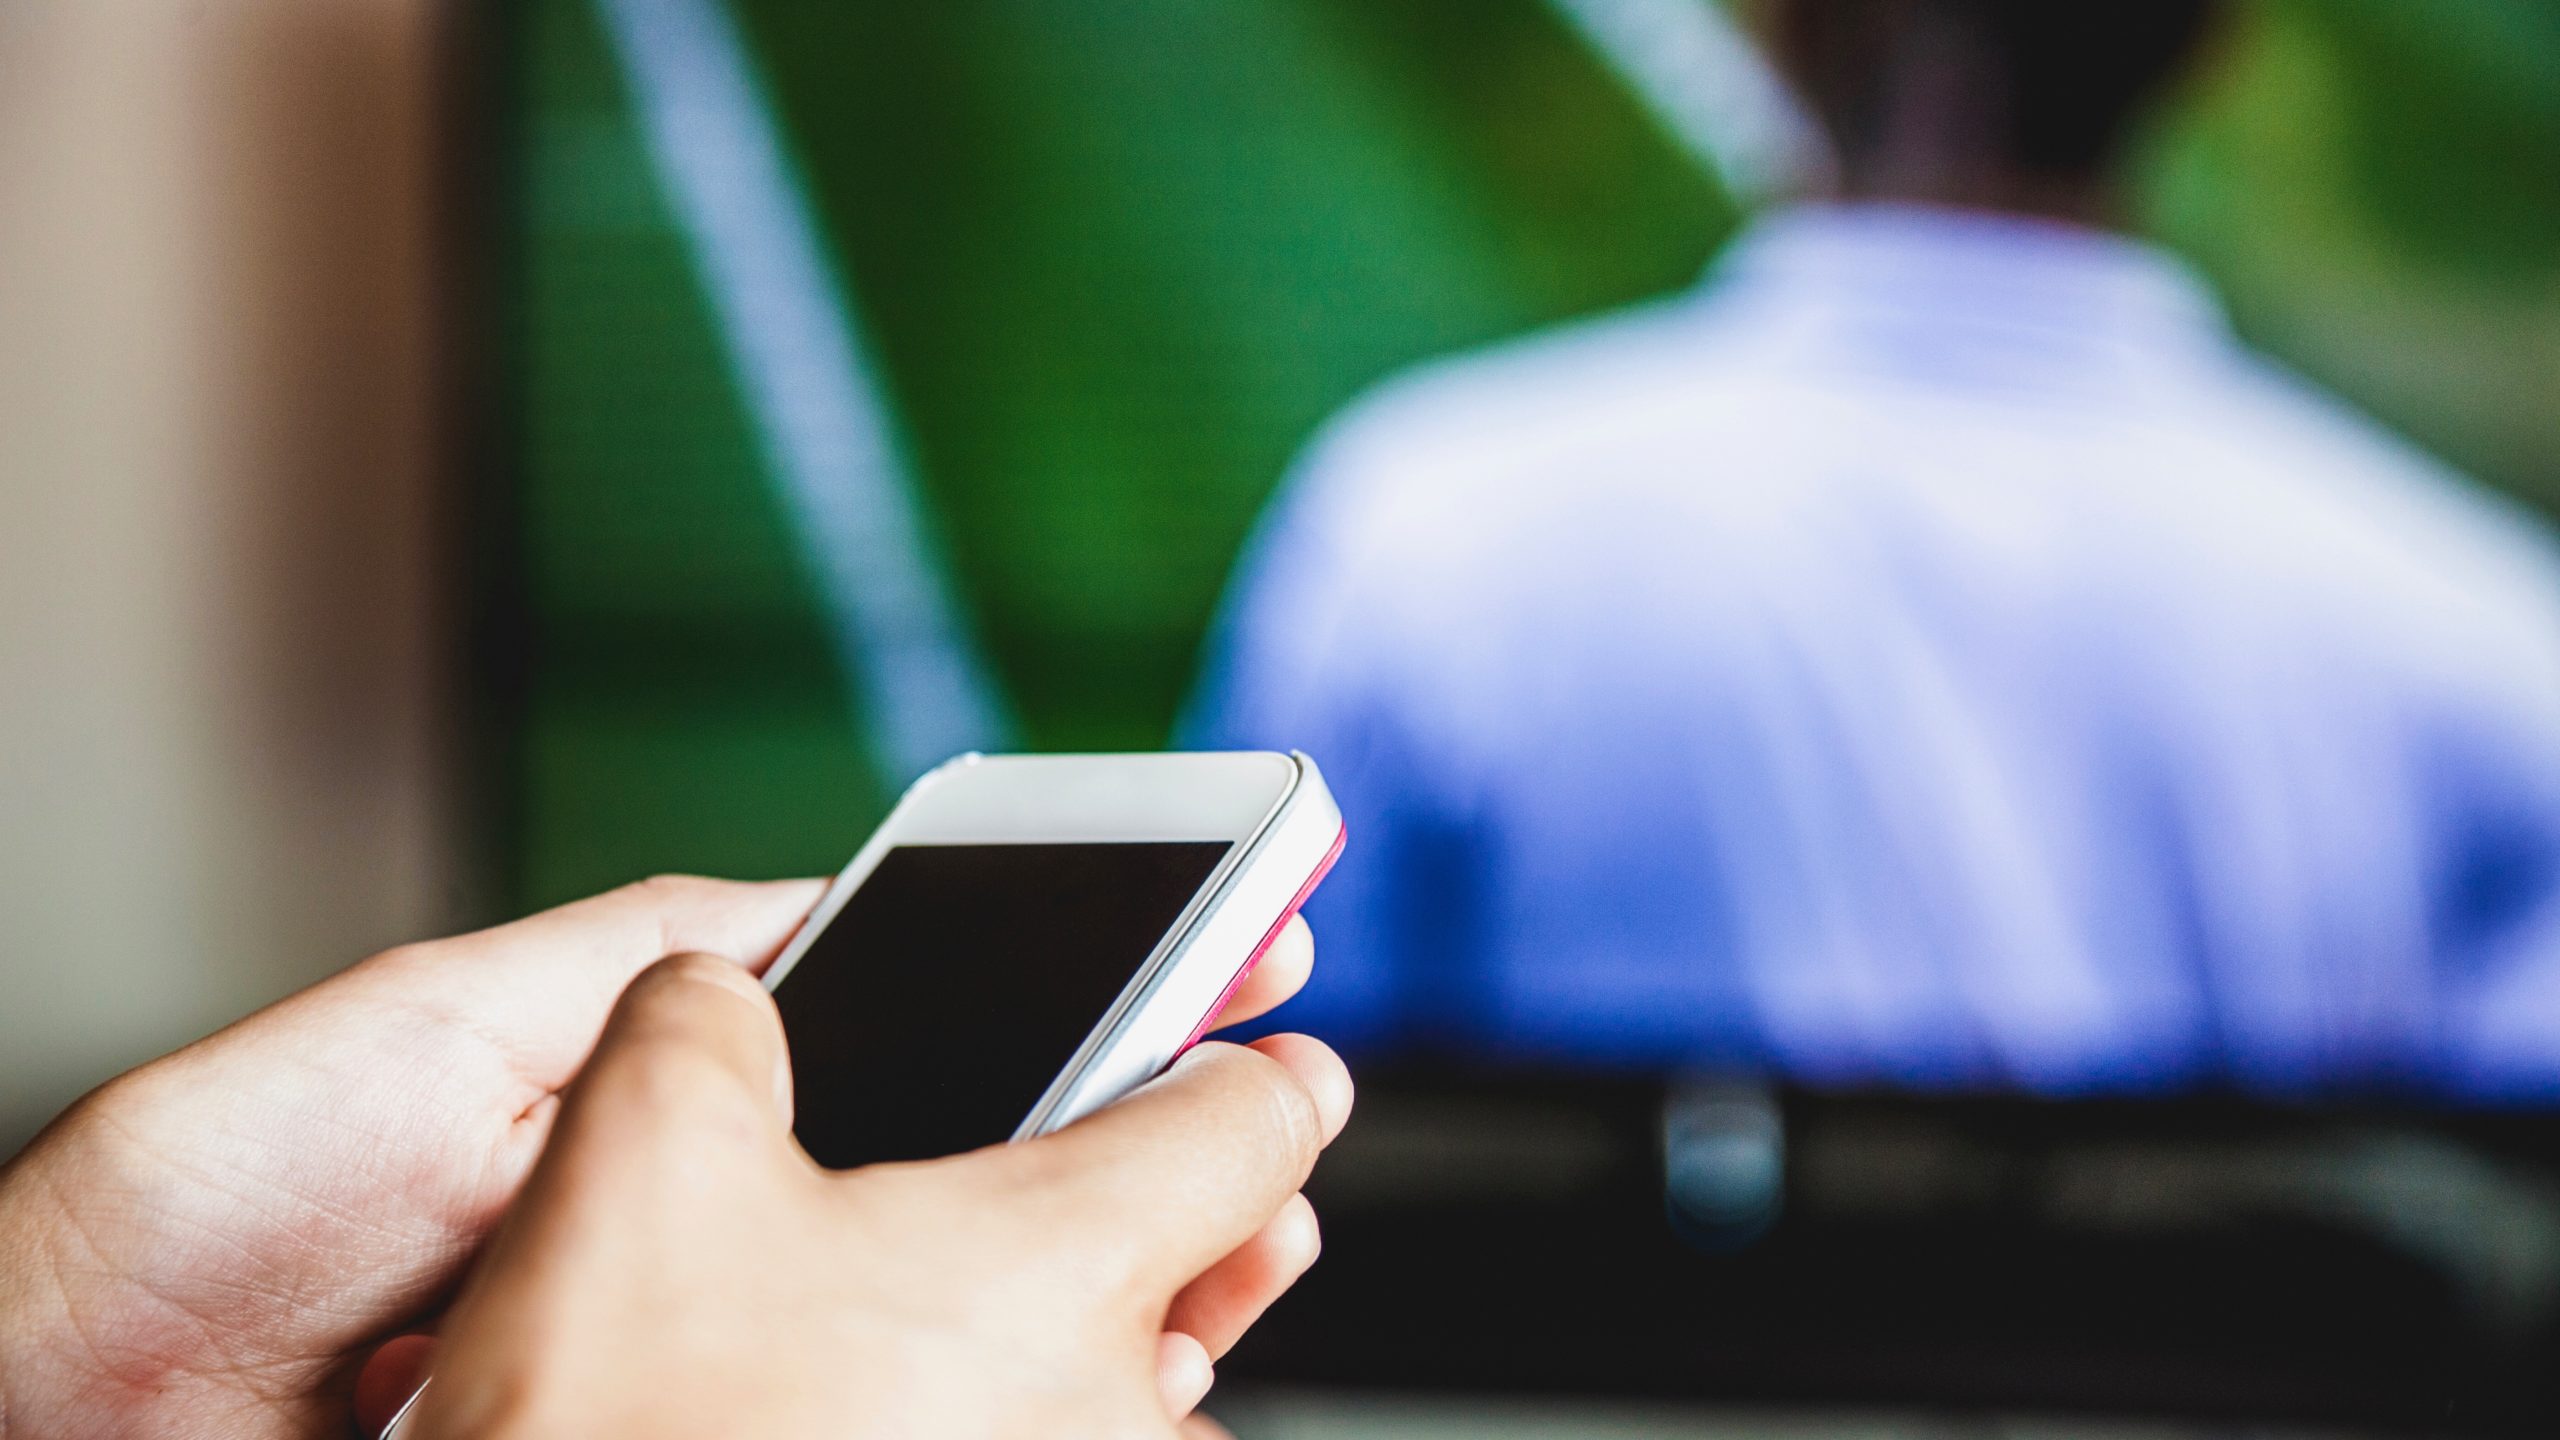 Sports and the Second Screen: Implications for Advertisers